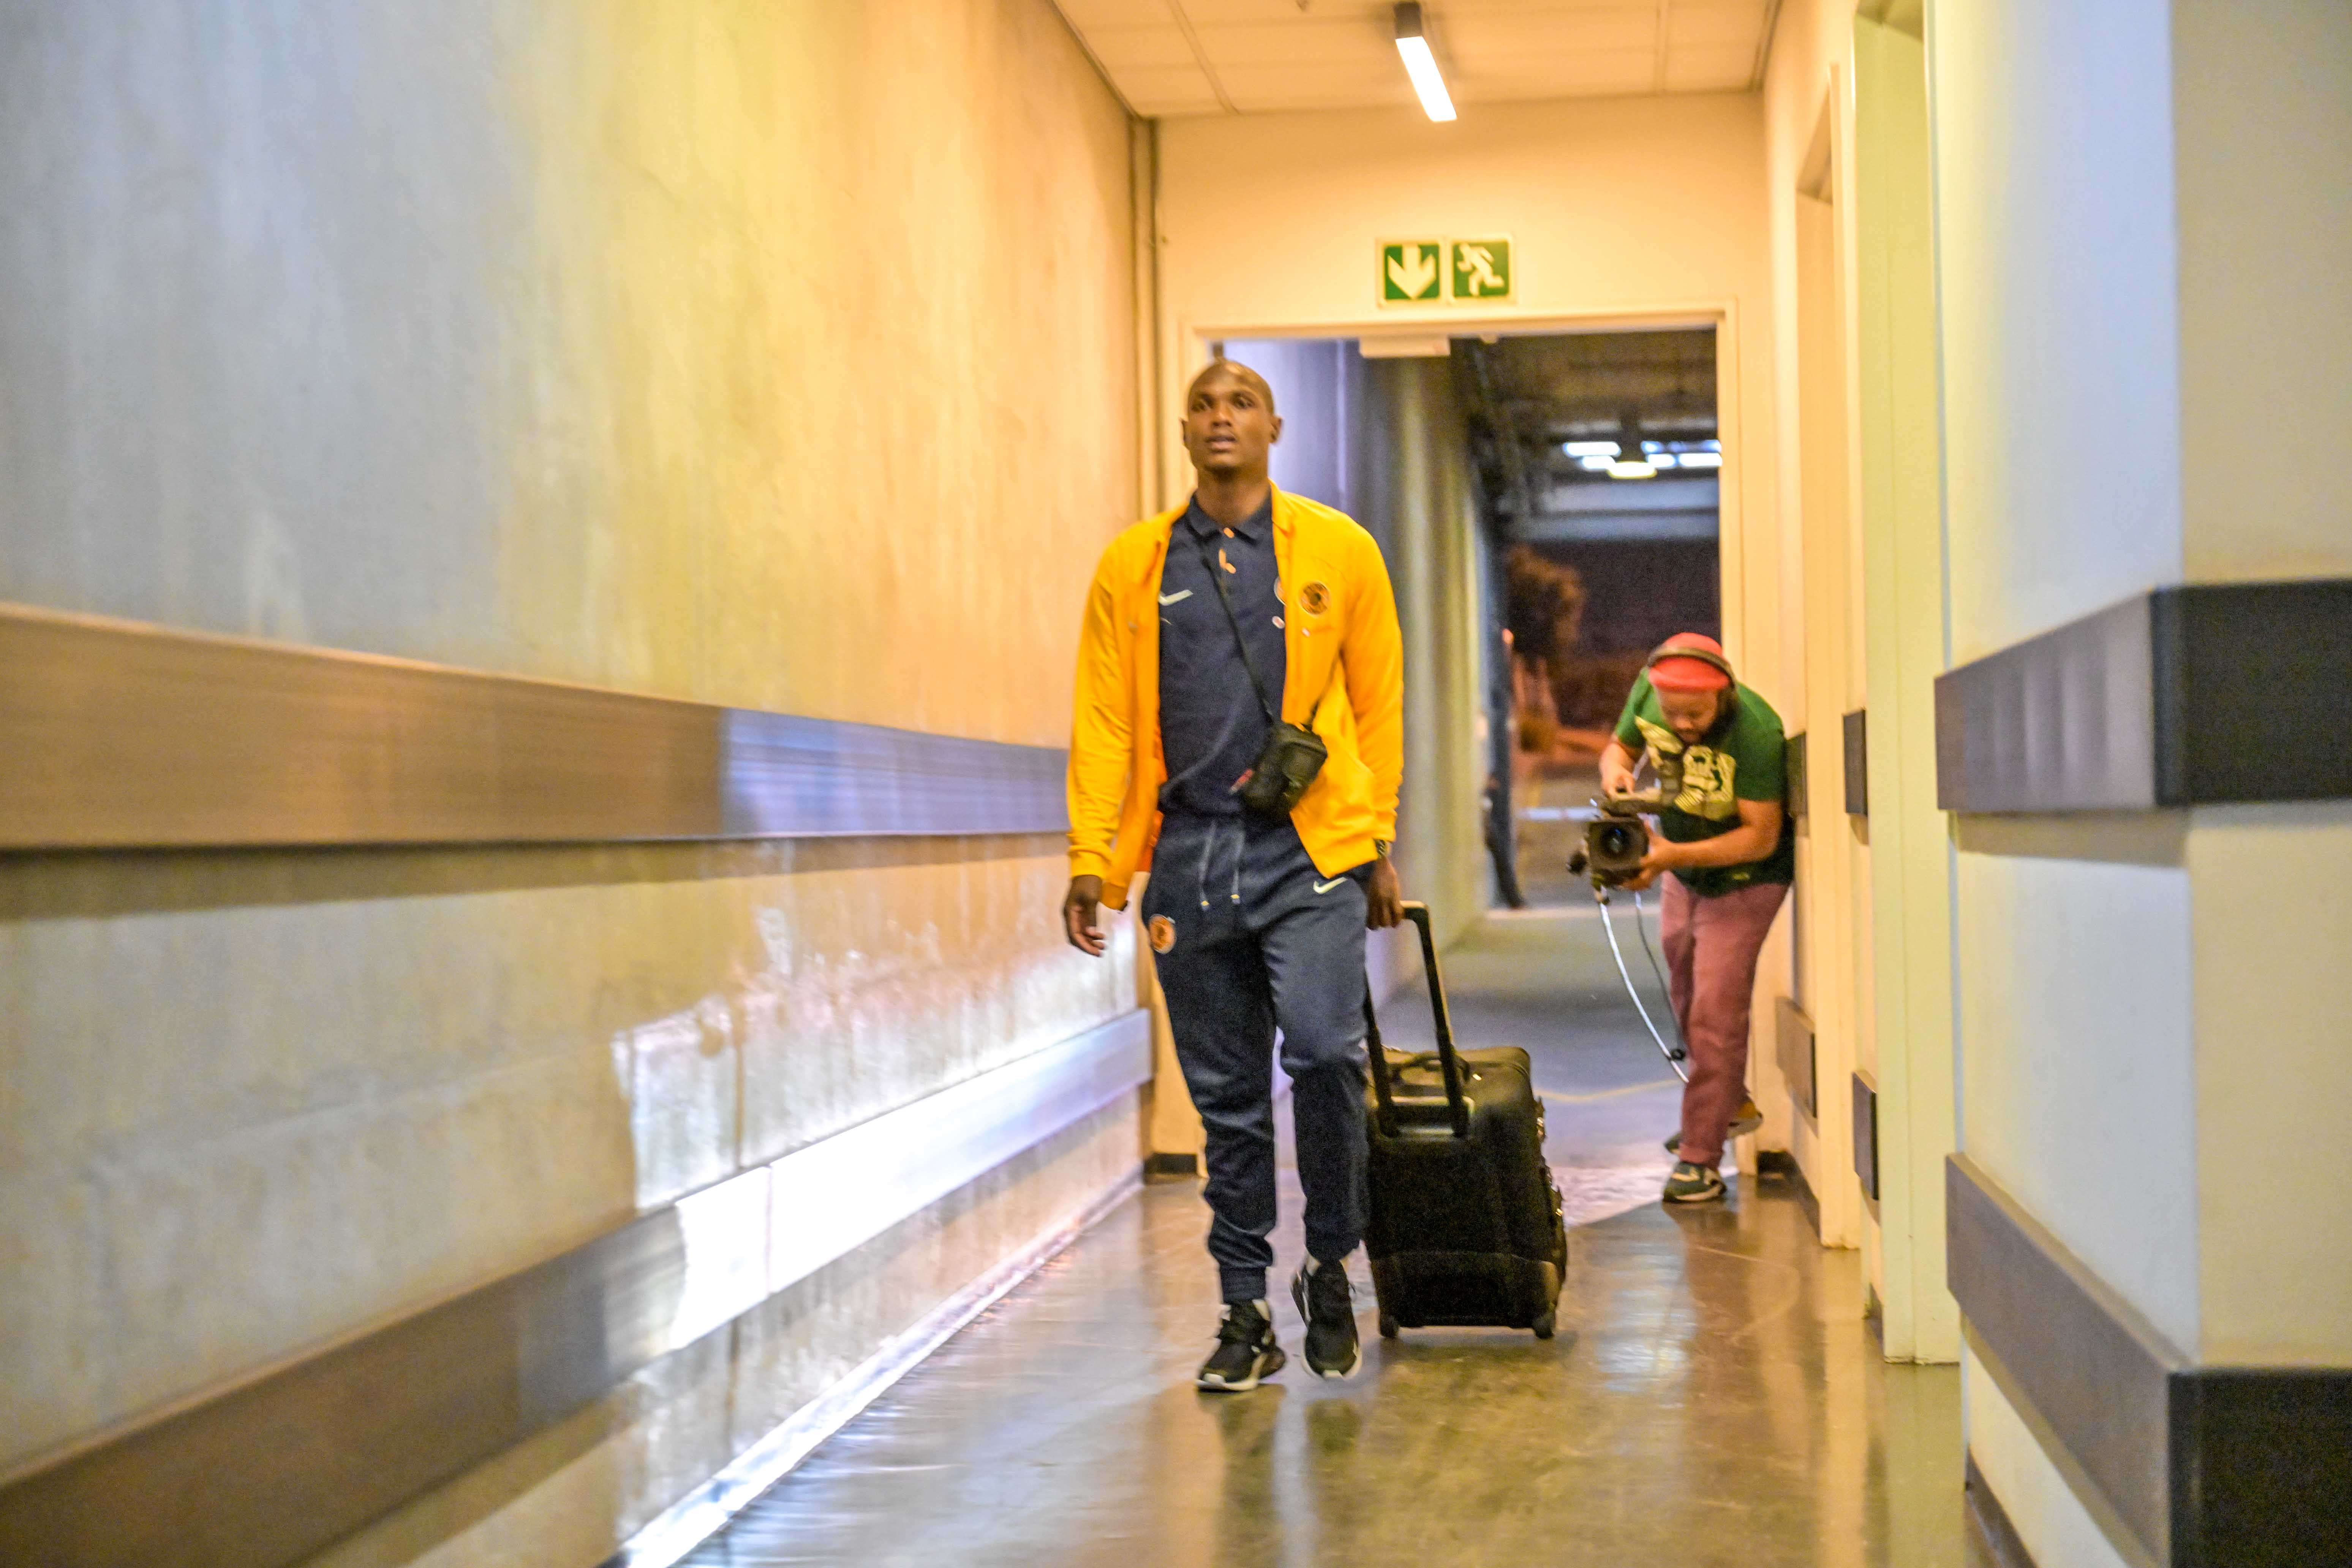 Kaizer Chiefs centre Back Njabulo Ngcobo arriving at the stadium during the Dstv Premier match against SuperSport United at FNB Stadium